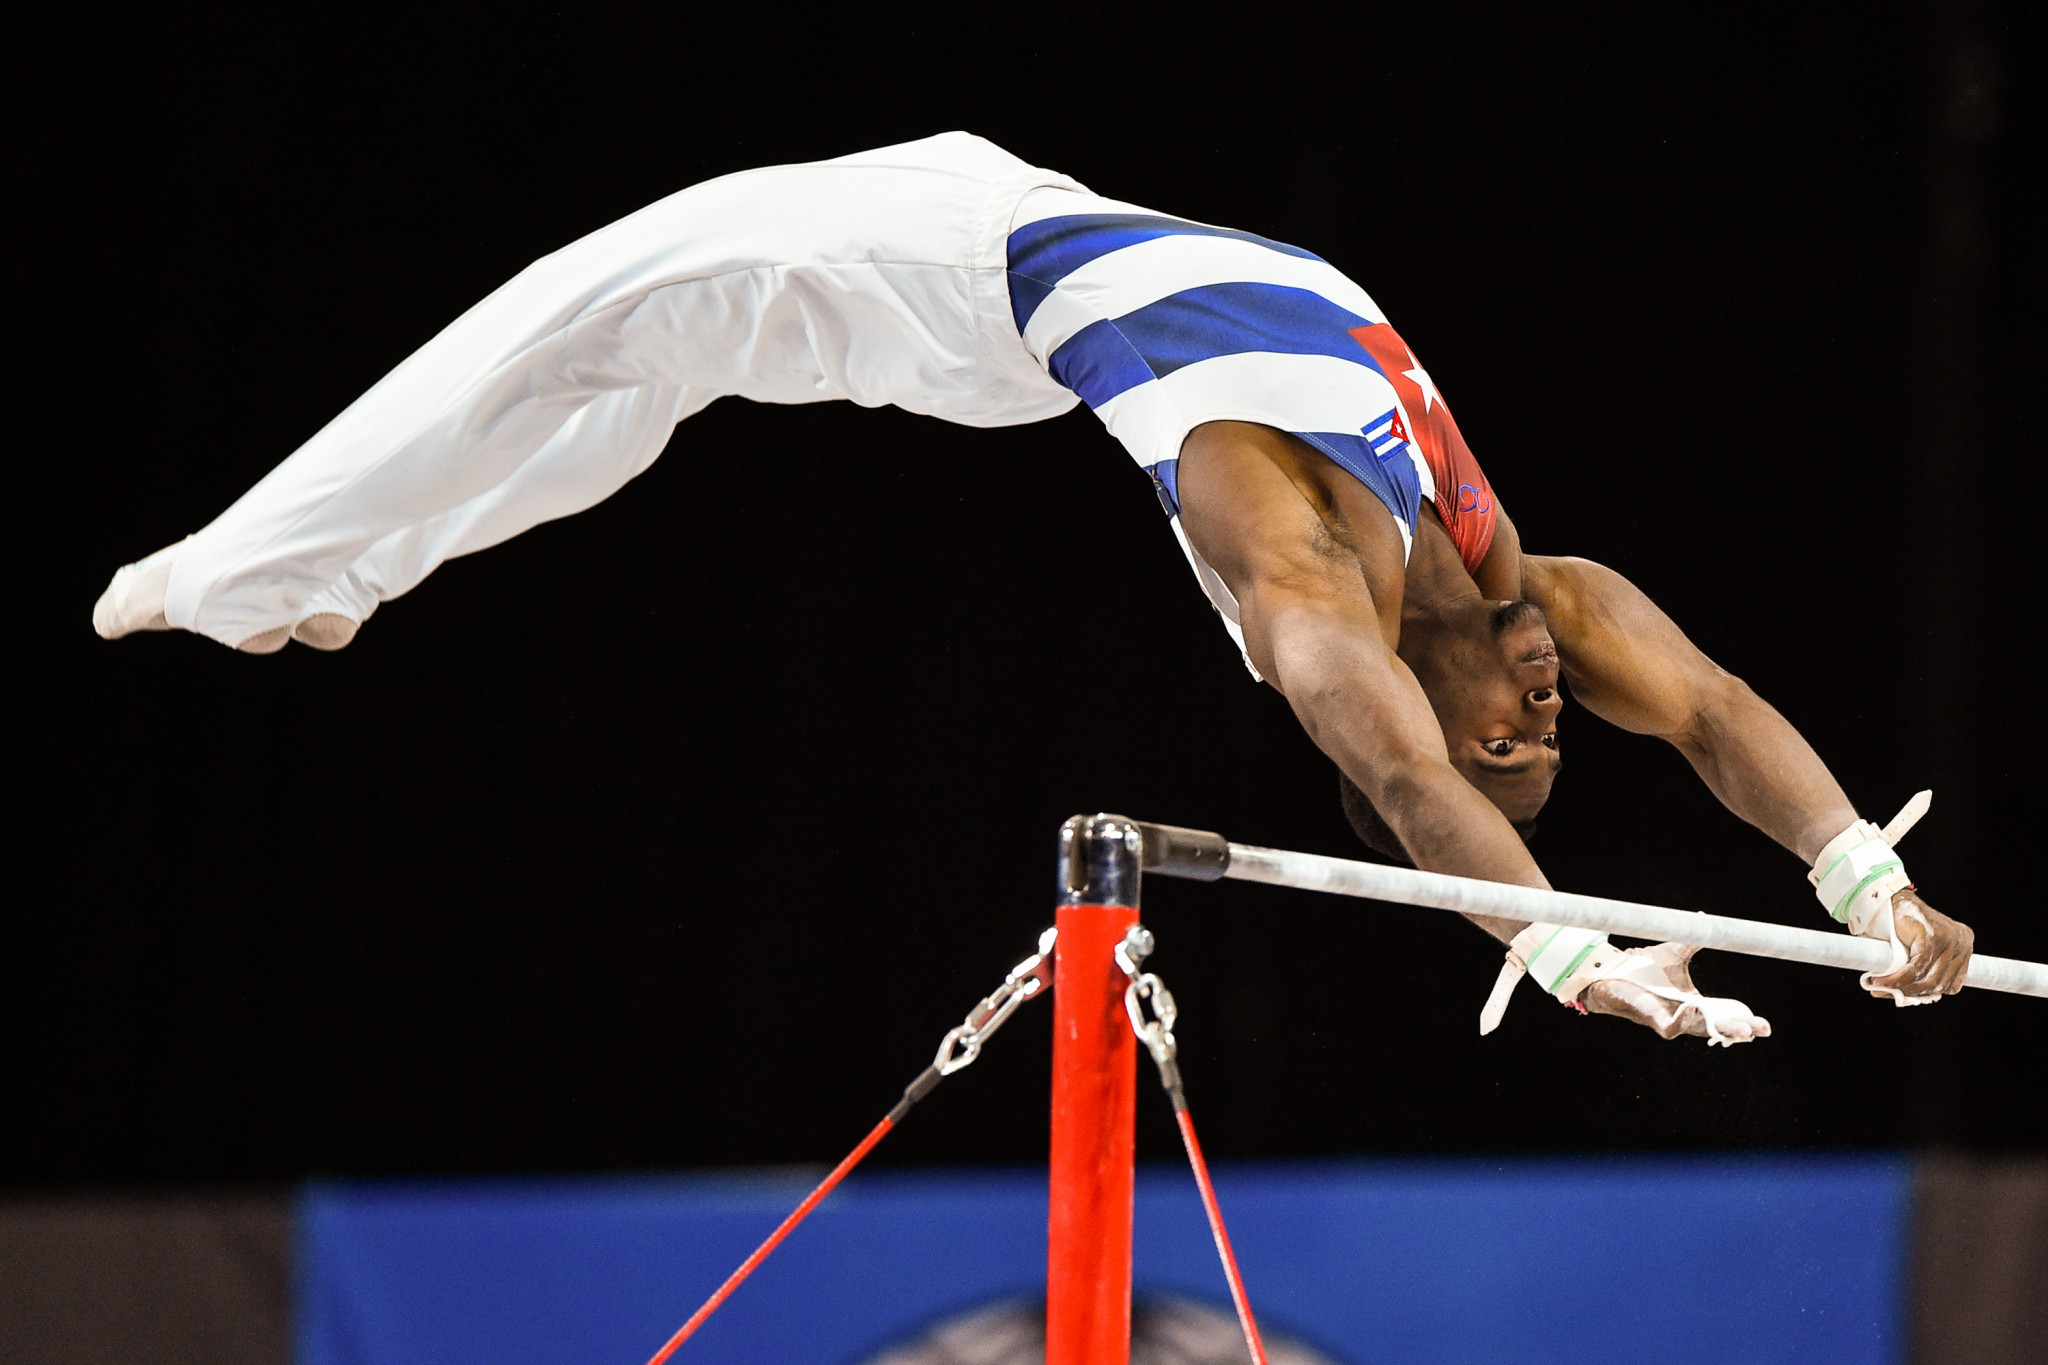 Cuba's Manrique Larduet qualified in top spot in the all-around standings as men's qualification came to a close ©Getty Images